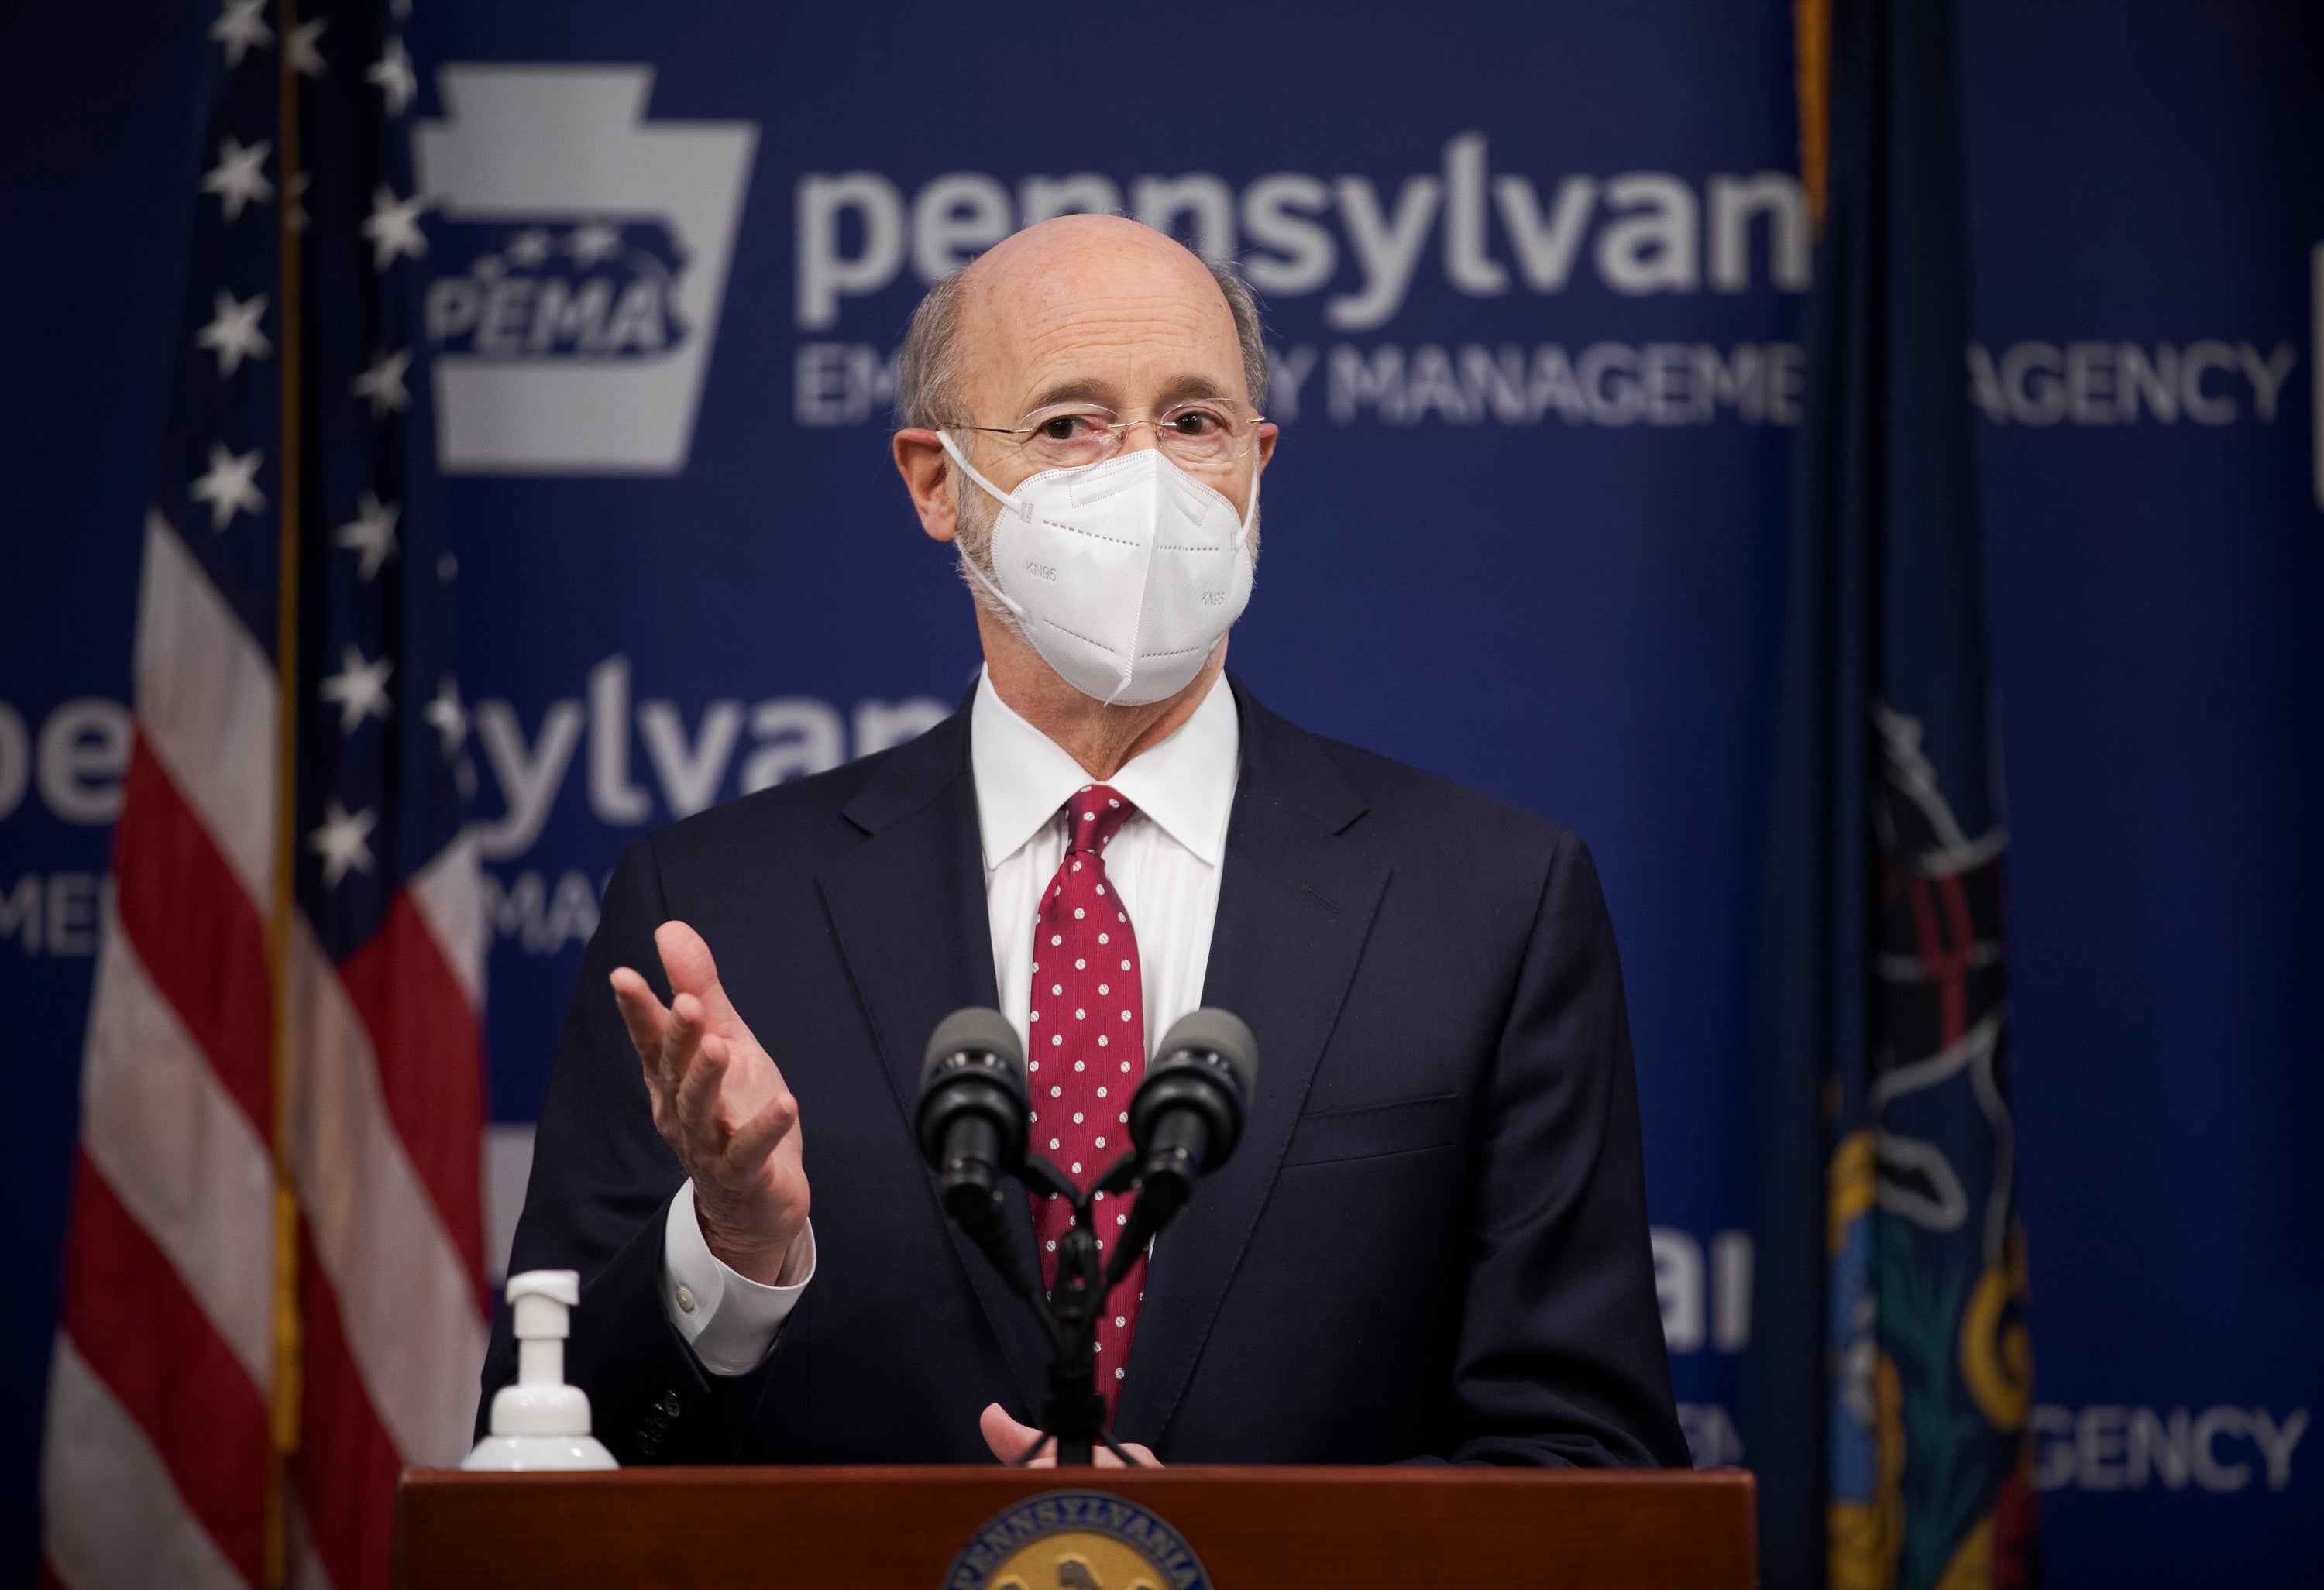 Gov. Tom Wolf, wearing a face mask, speaks to the press from behind a podium